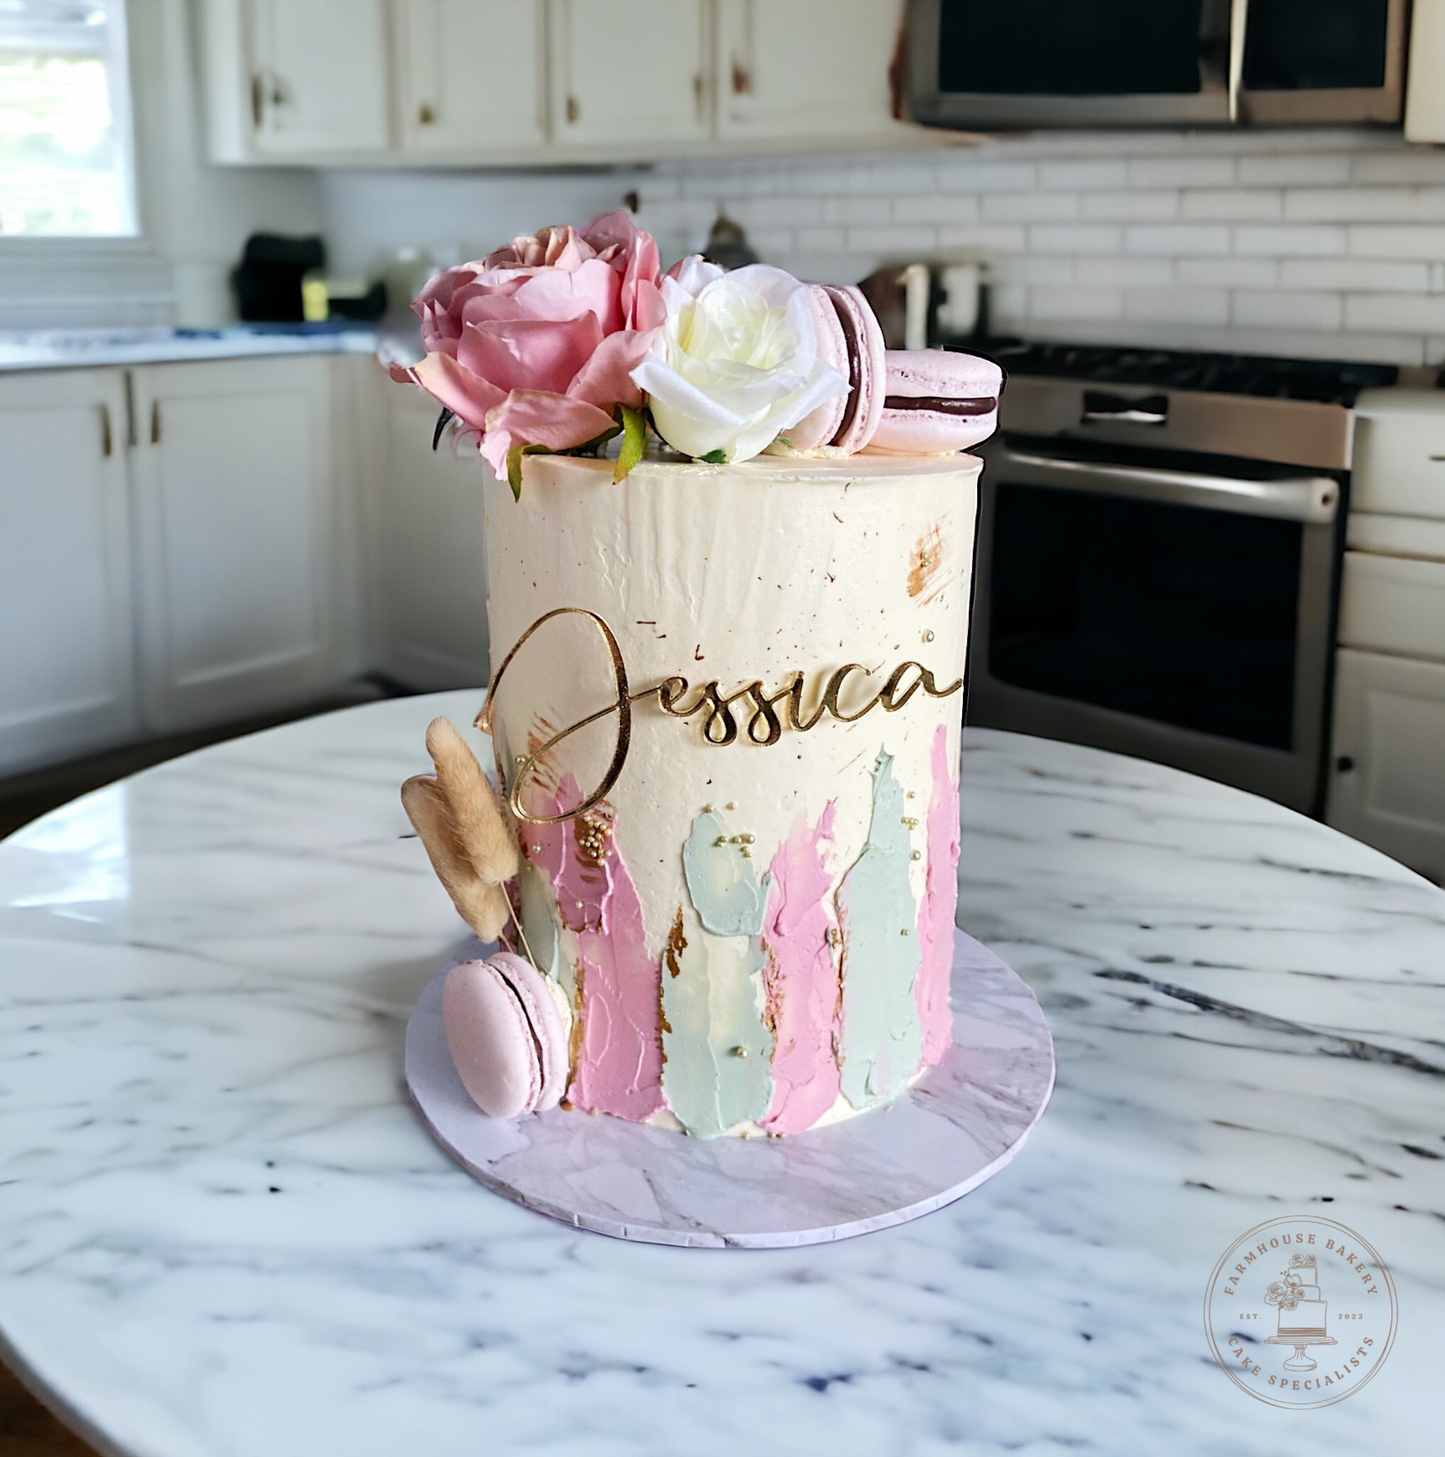 Two toned, floral cake